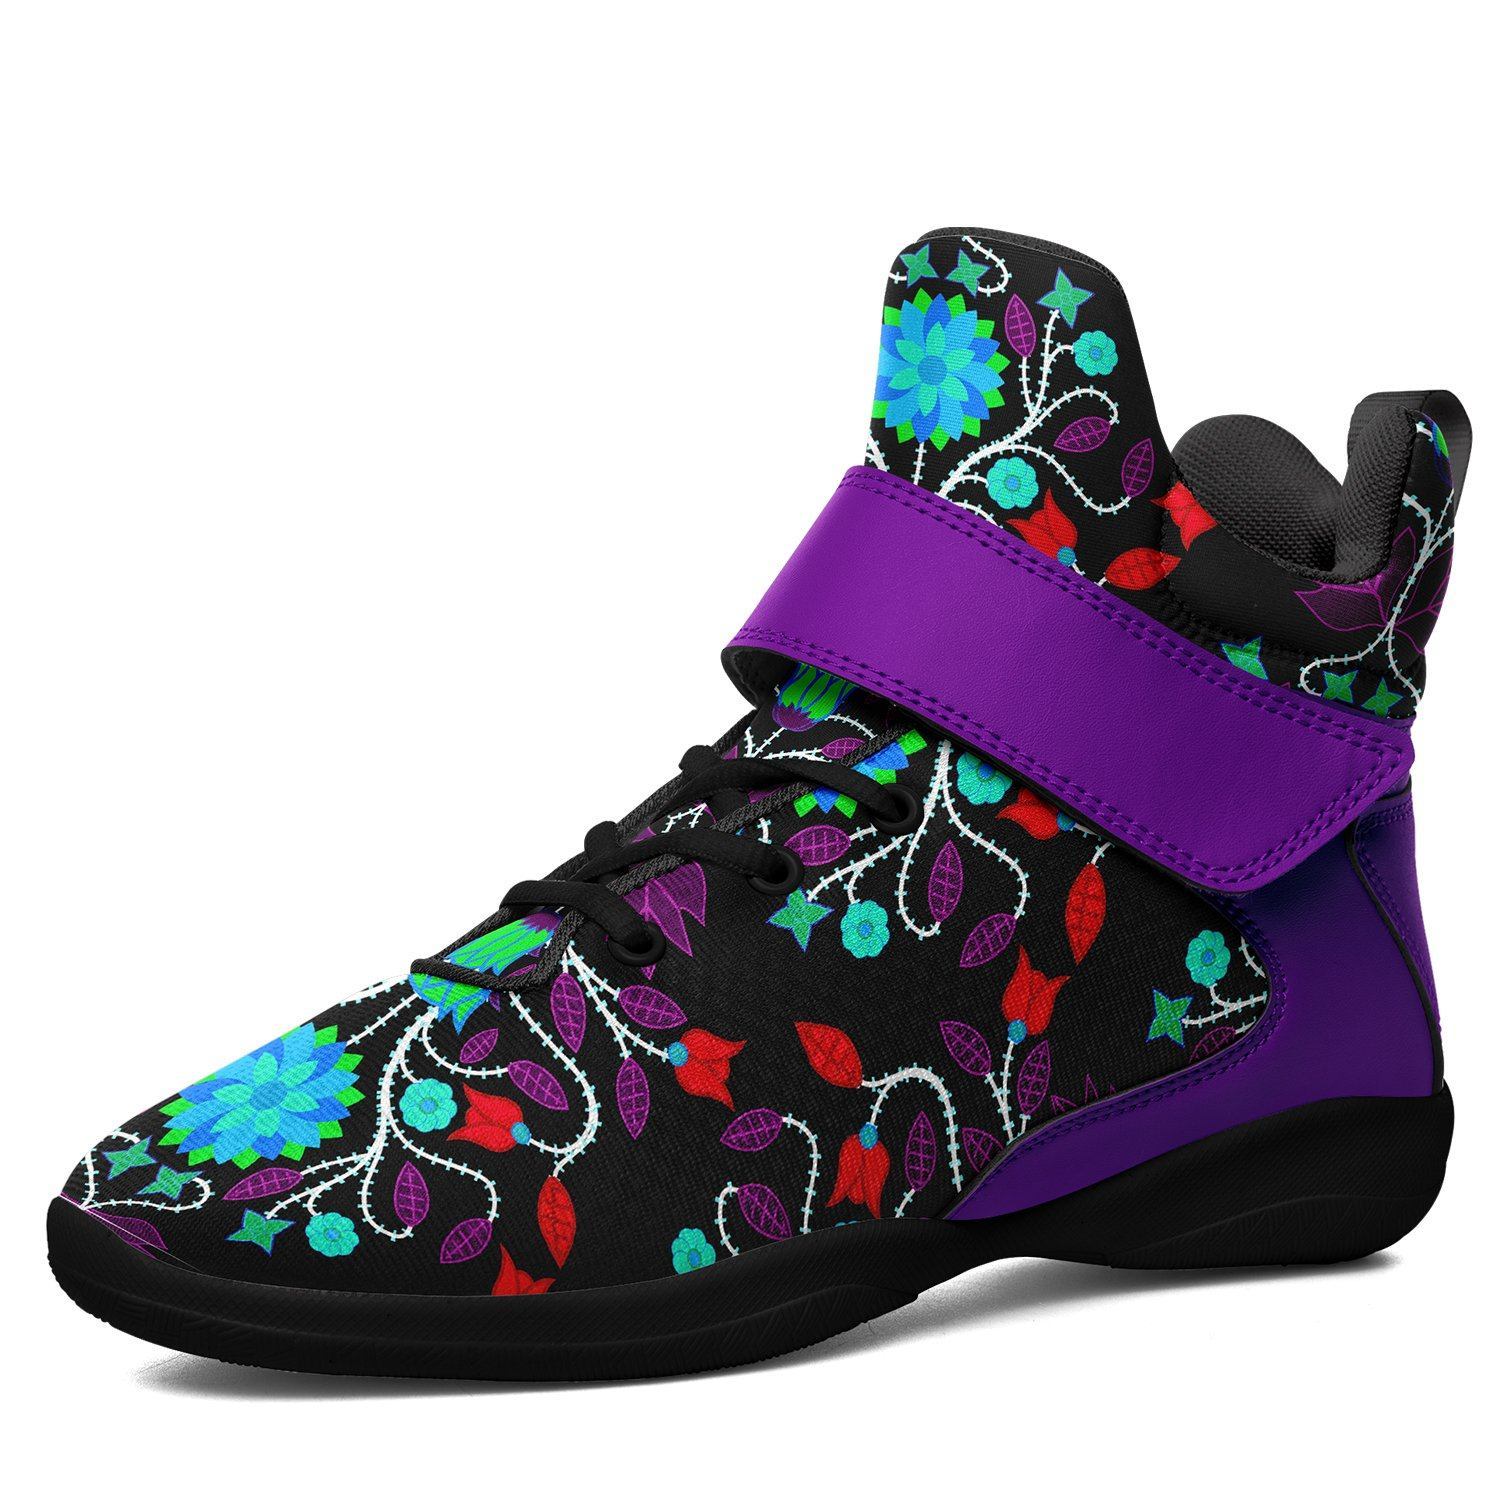 Floral Beadwork Four Clans Winter Kid's Ipottaa Basketball / Sport High Top Shoes 49 Dzine US Child 12.5 / EUR 30 Black Sole with Indigo Strap 